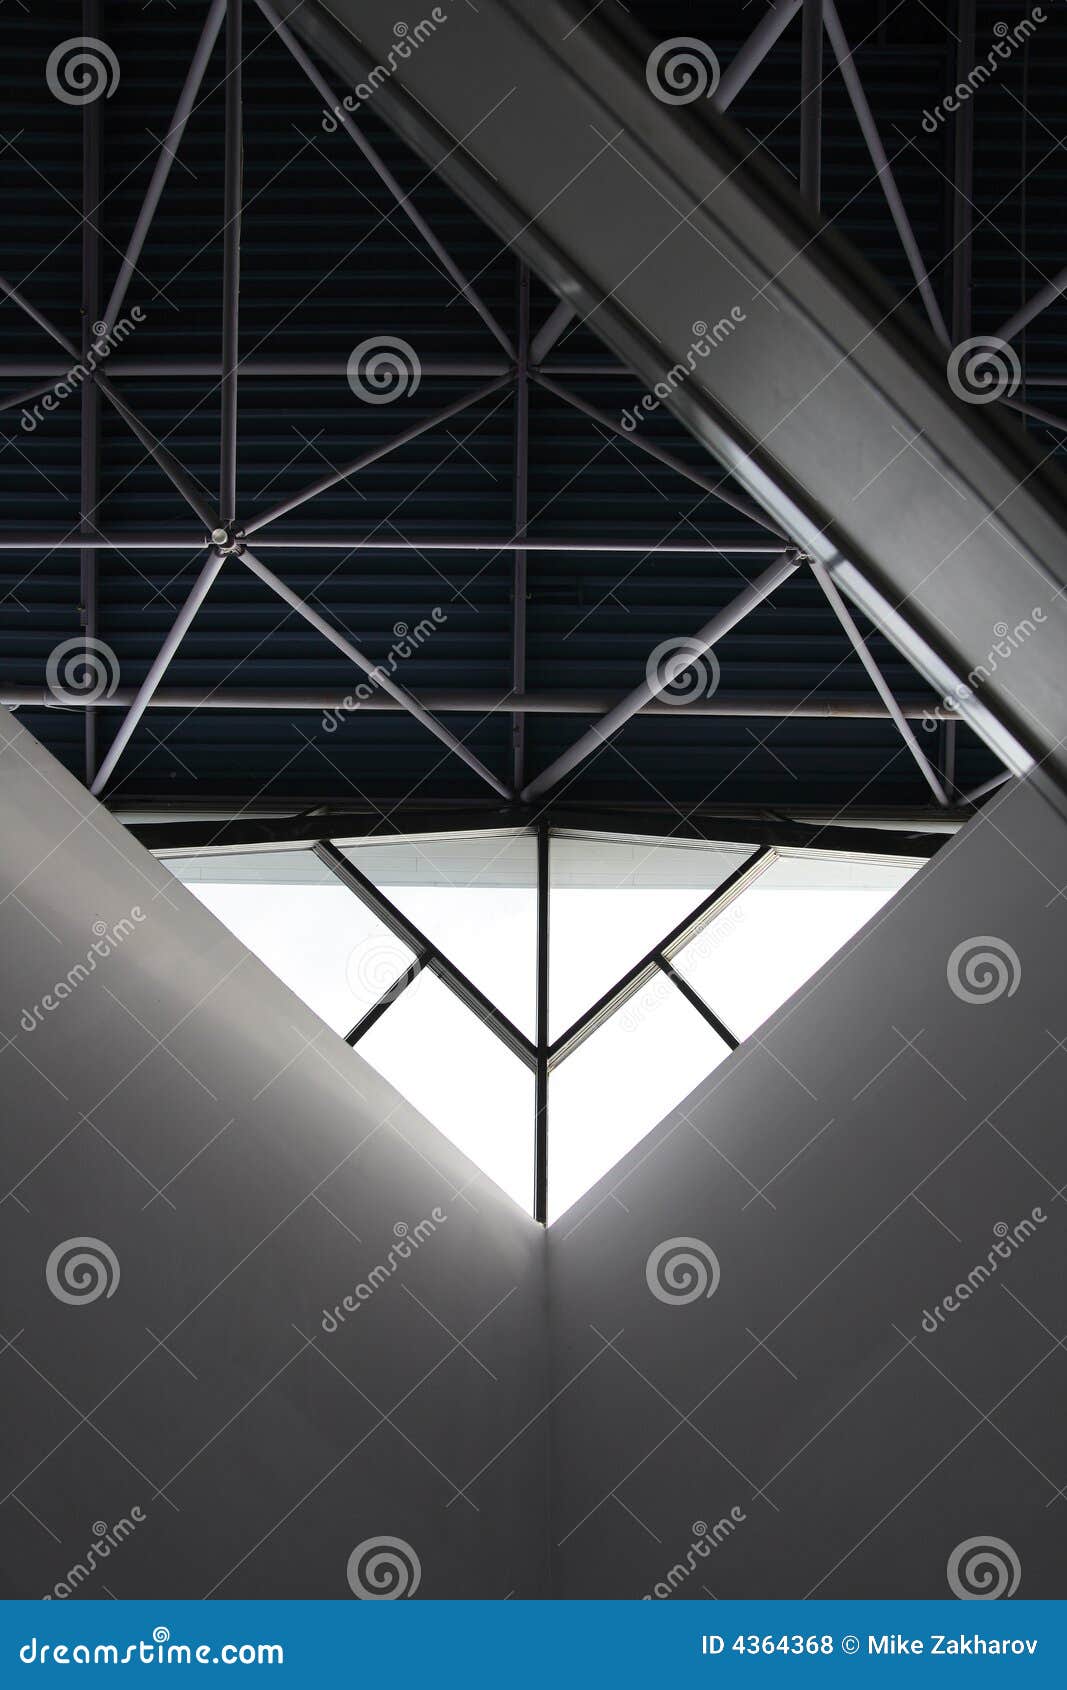 ceiling of an industrial building.